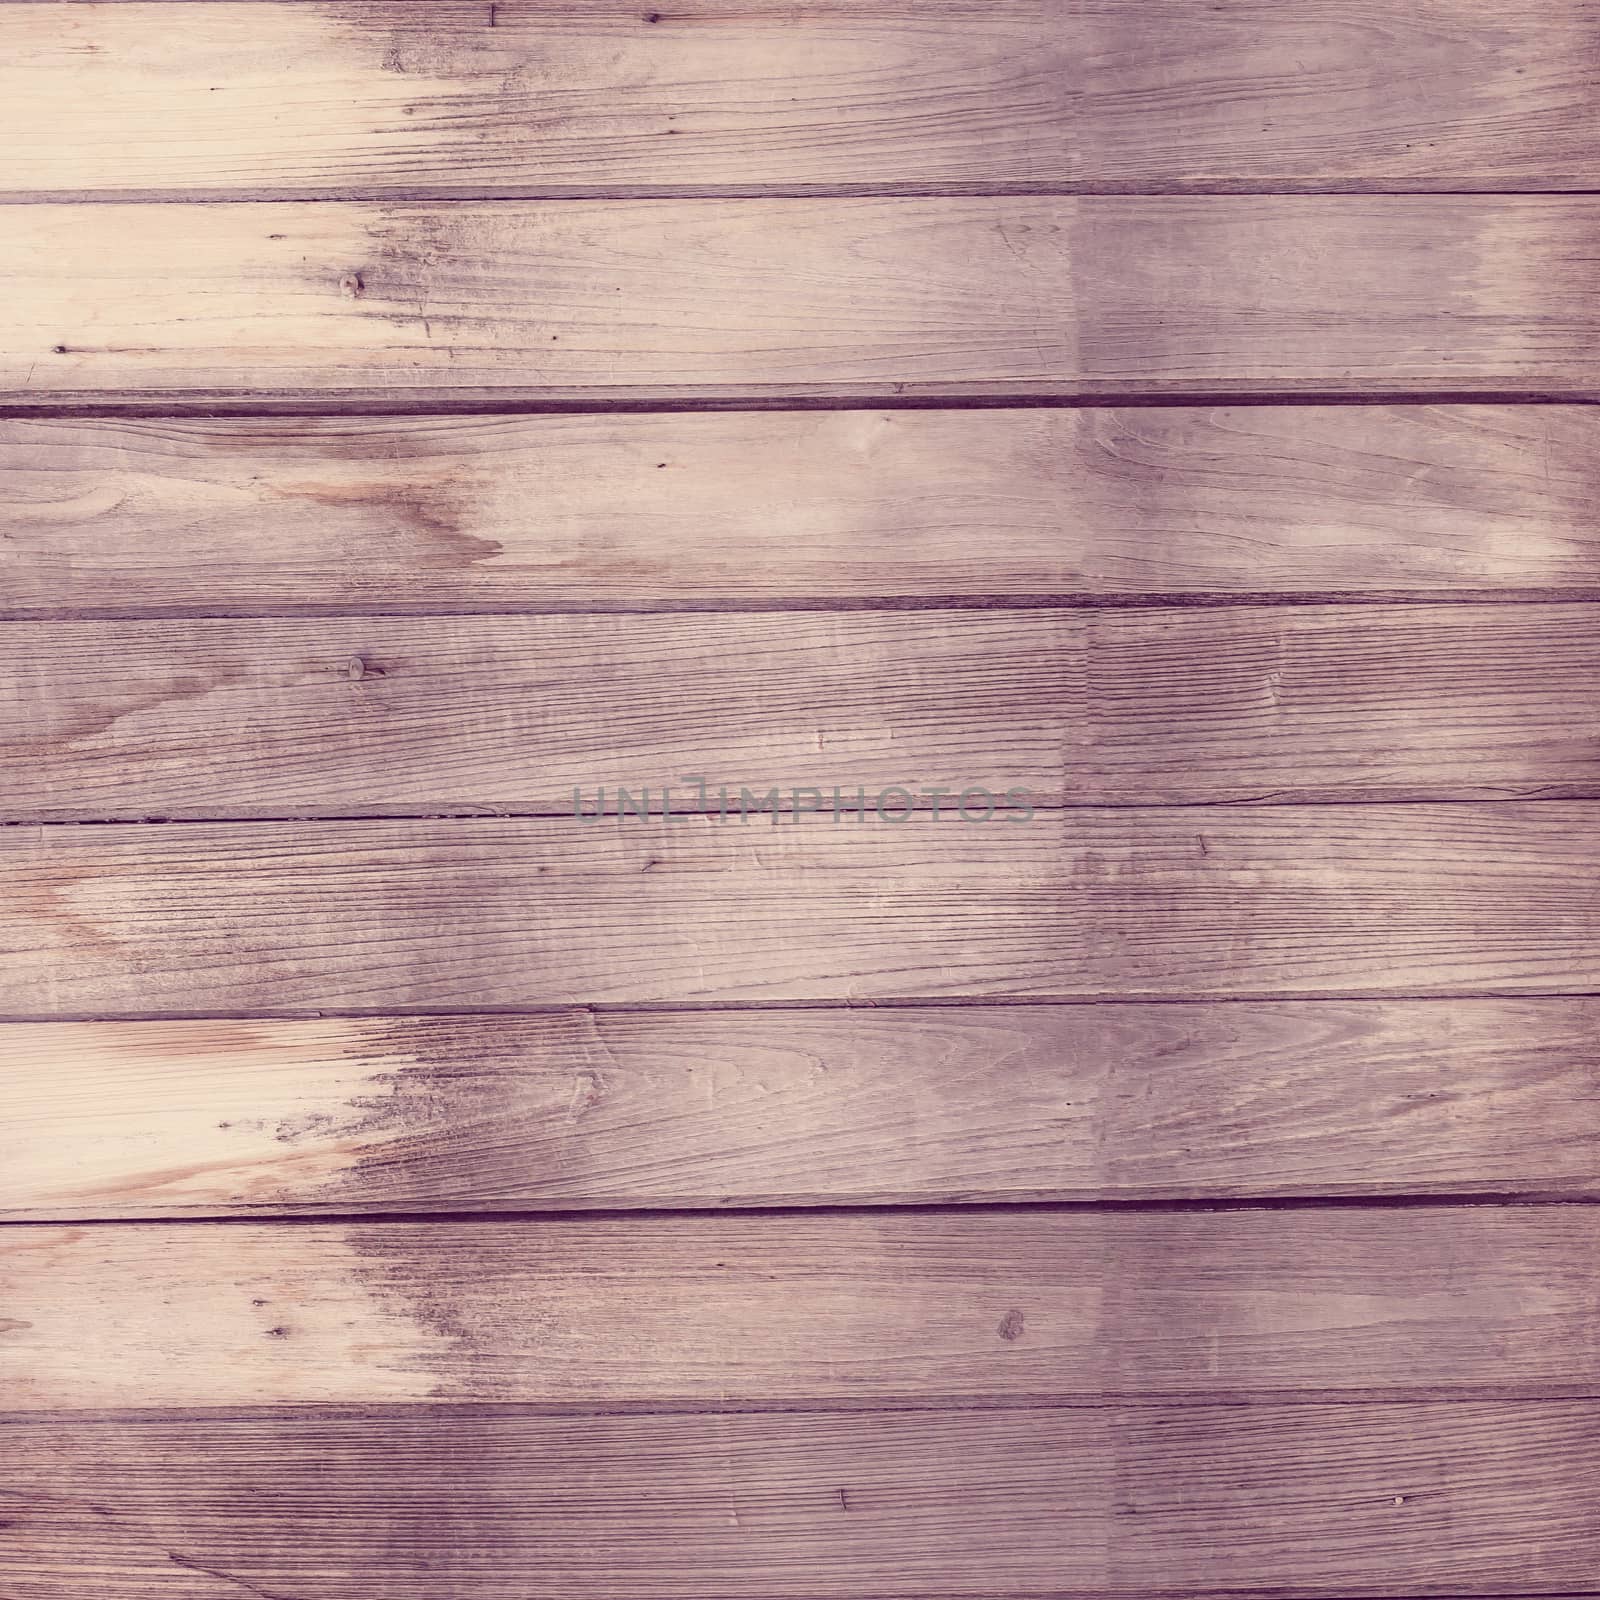 Pink vintage wood plank wall texture background.